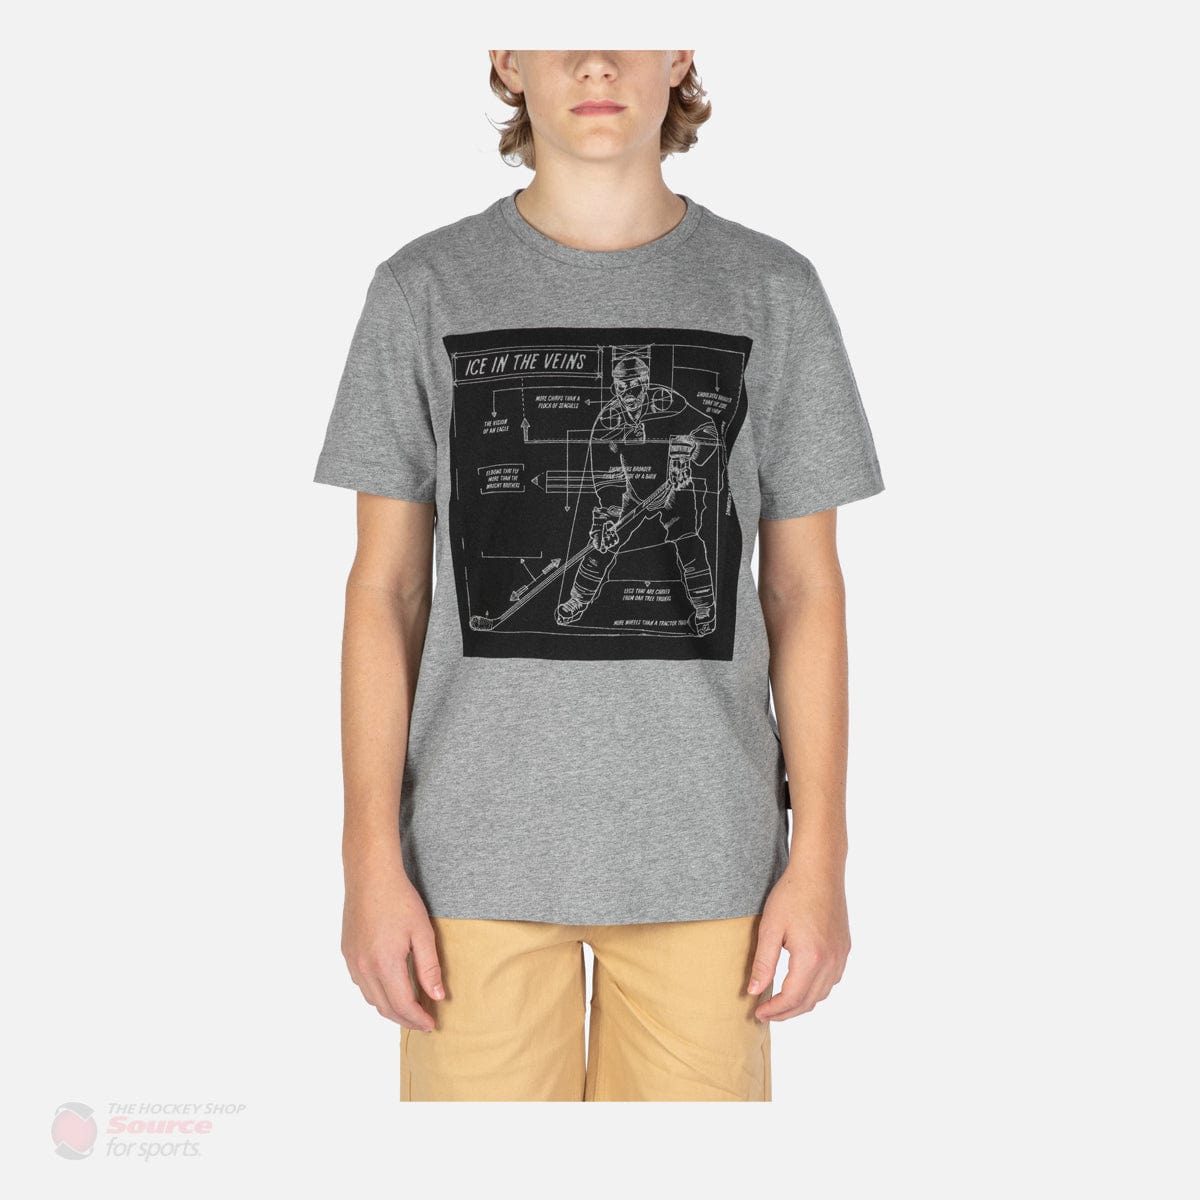 Gongshow Hockey Ice In The Veins Youth Shirt